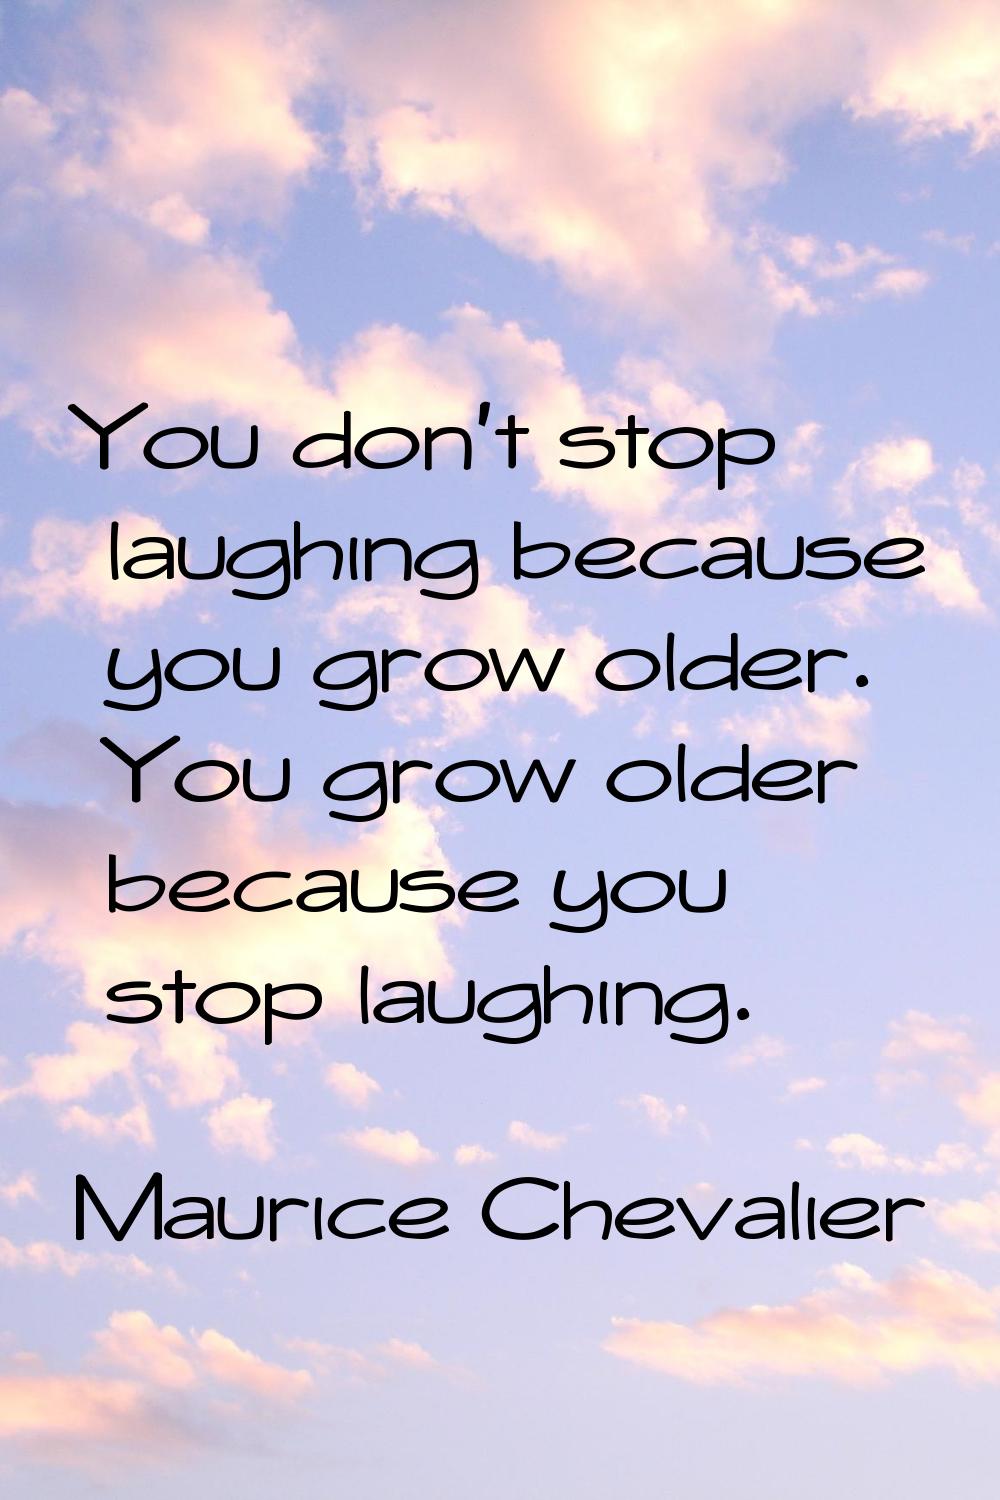 You don't stop laughing because you grow older. You grow older because you stop laughing.